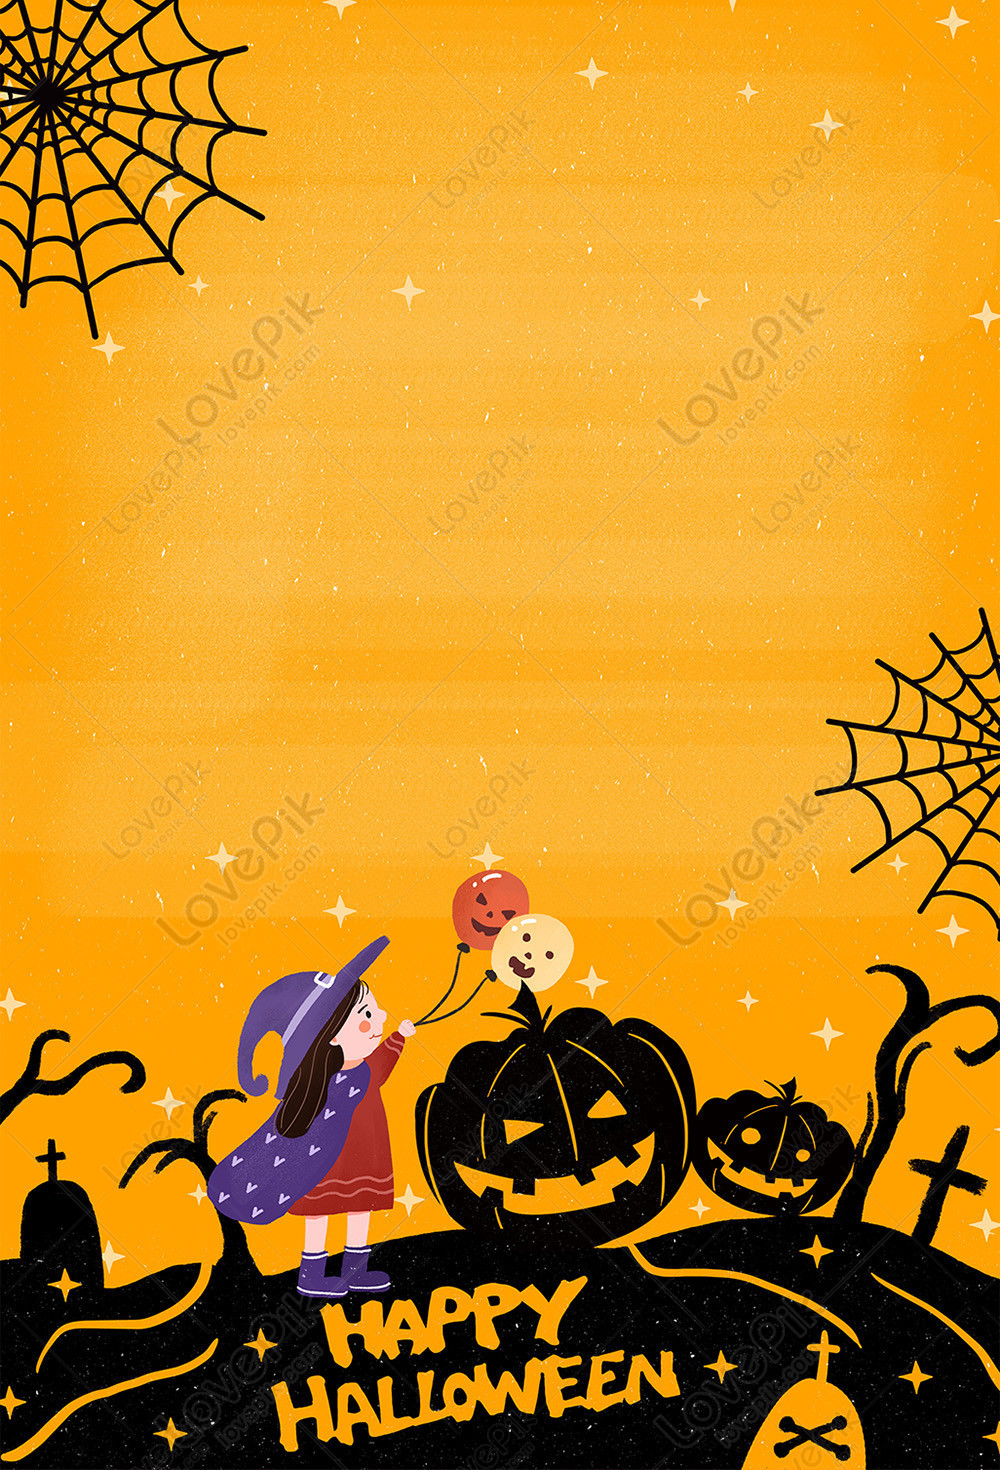 Halloween Poster Background Download Free | Poster Background Image on  Lovepik | 401641296